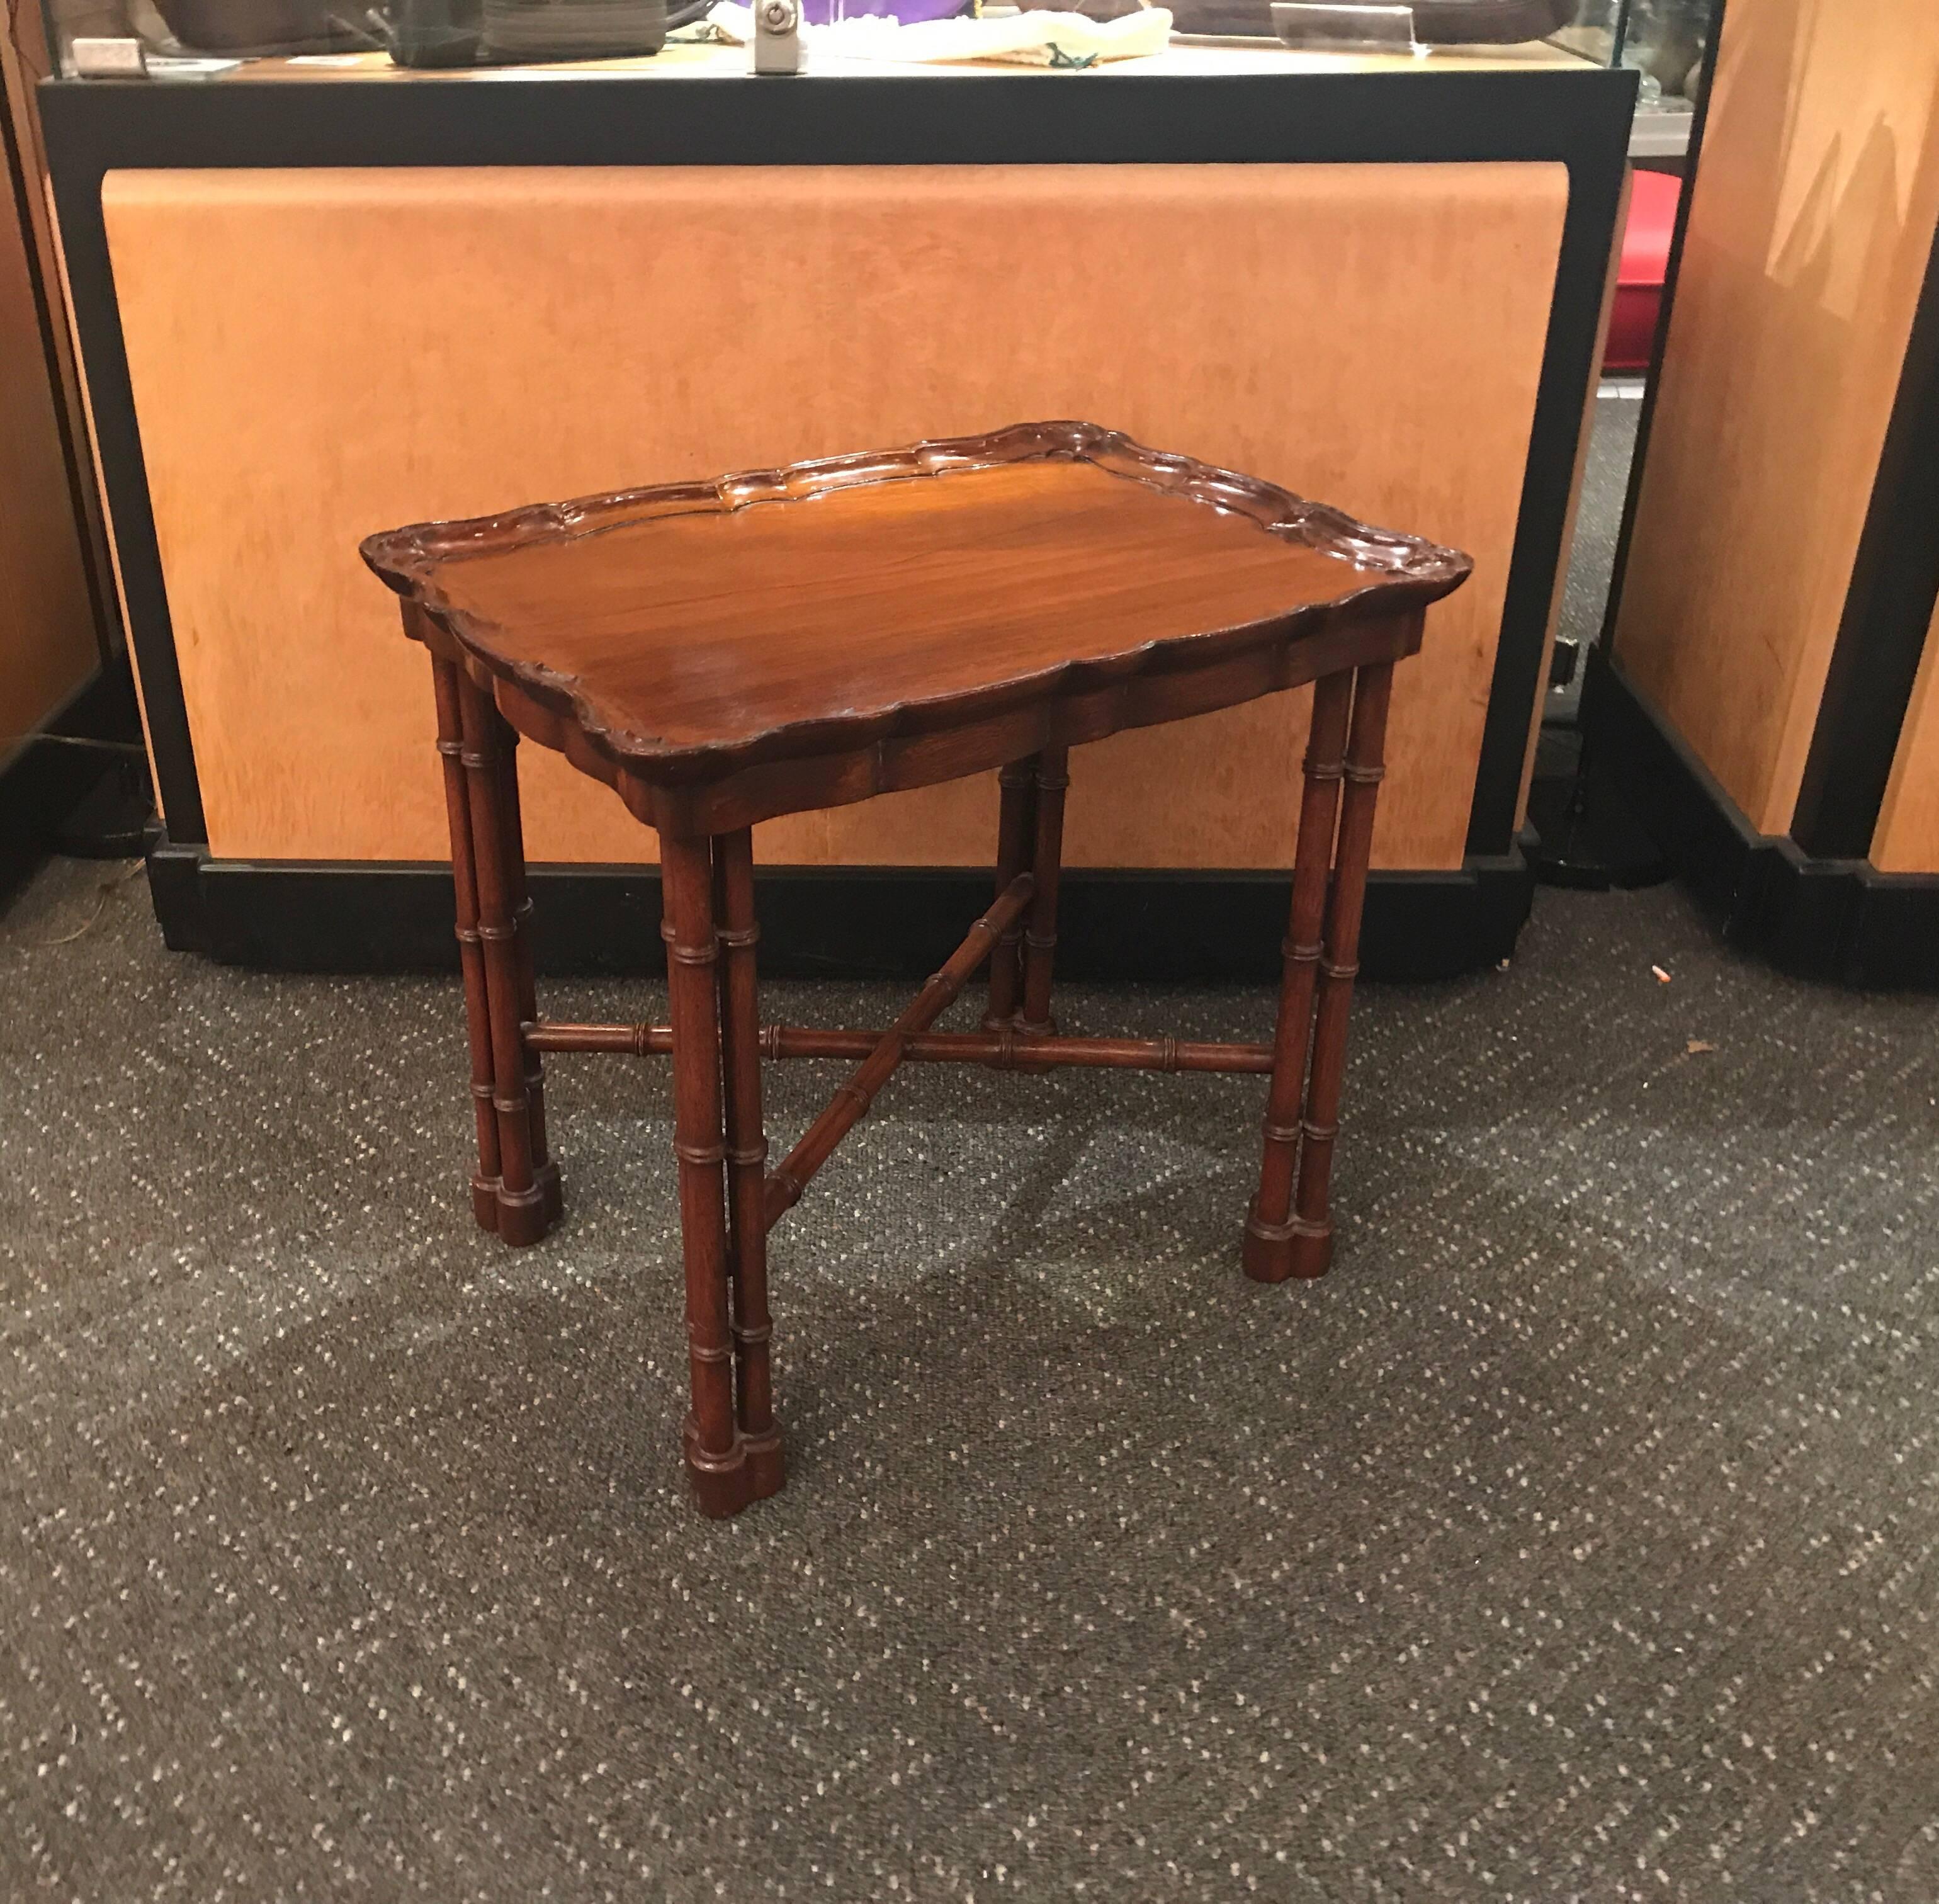 Elegant solid mahogany hand-carved drinks table. The Regency base topped with a well carved piecrust edge. The top is carved from a solid piece of wood. Well made and beautiful. The top is attached.